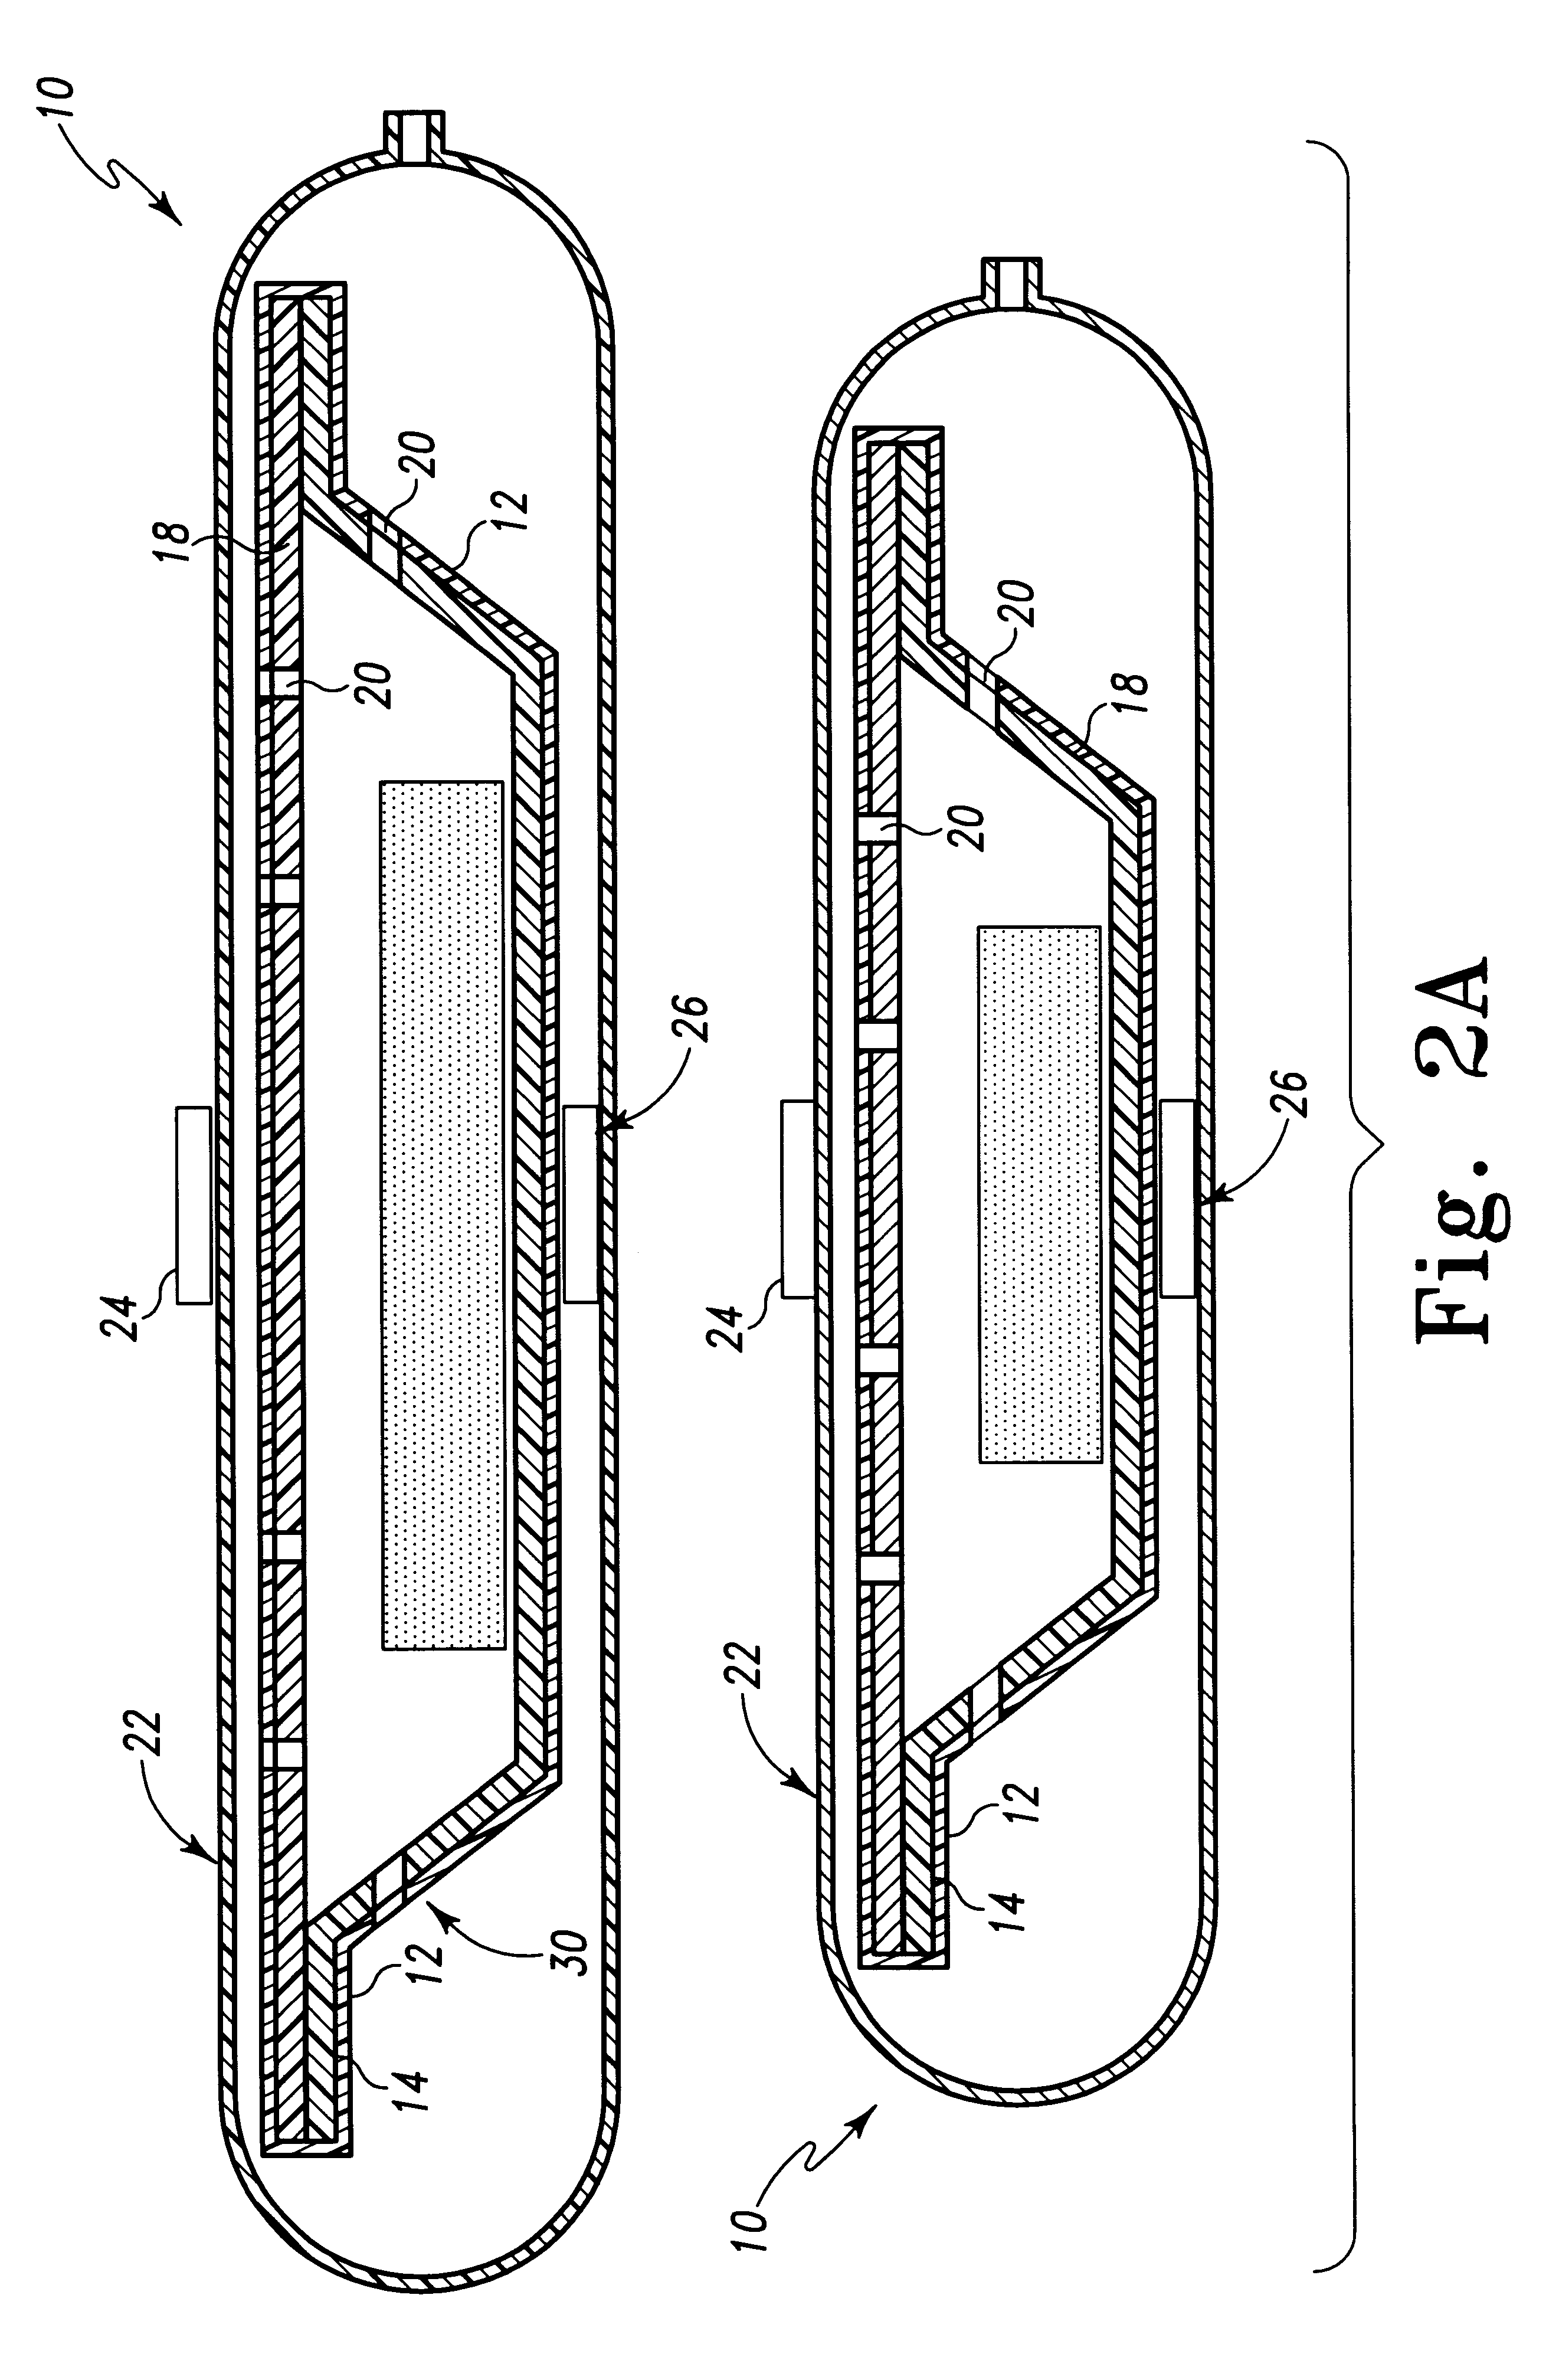 Method for creating modified atmosphere packaging